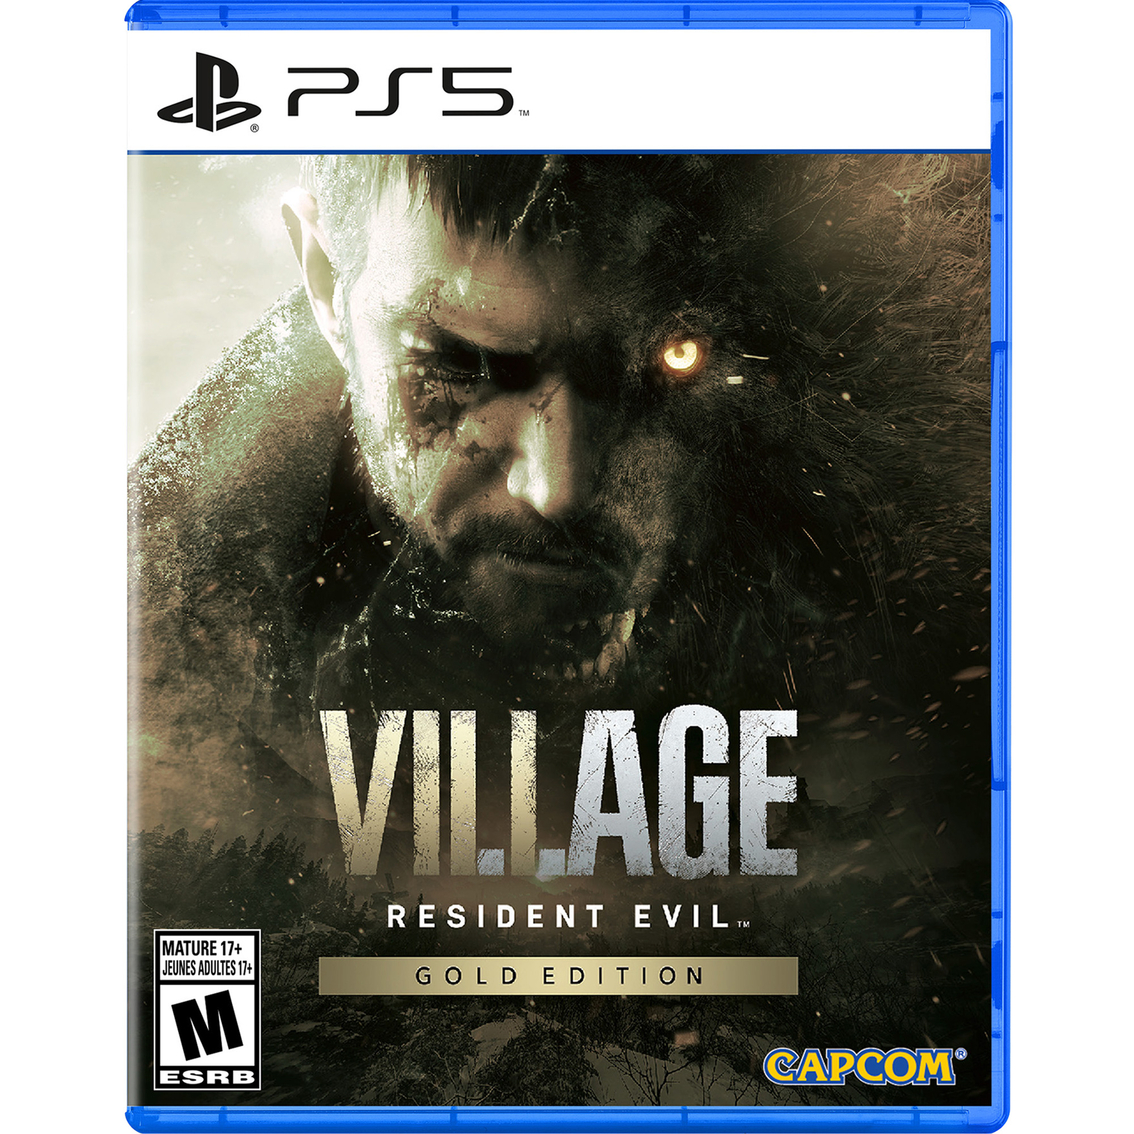 Resident Evil Village Gold Edition (ps5), Playstation 5, Electronics